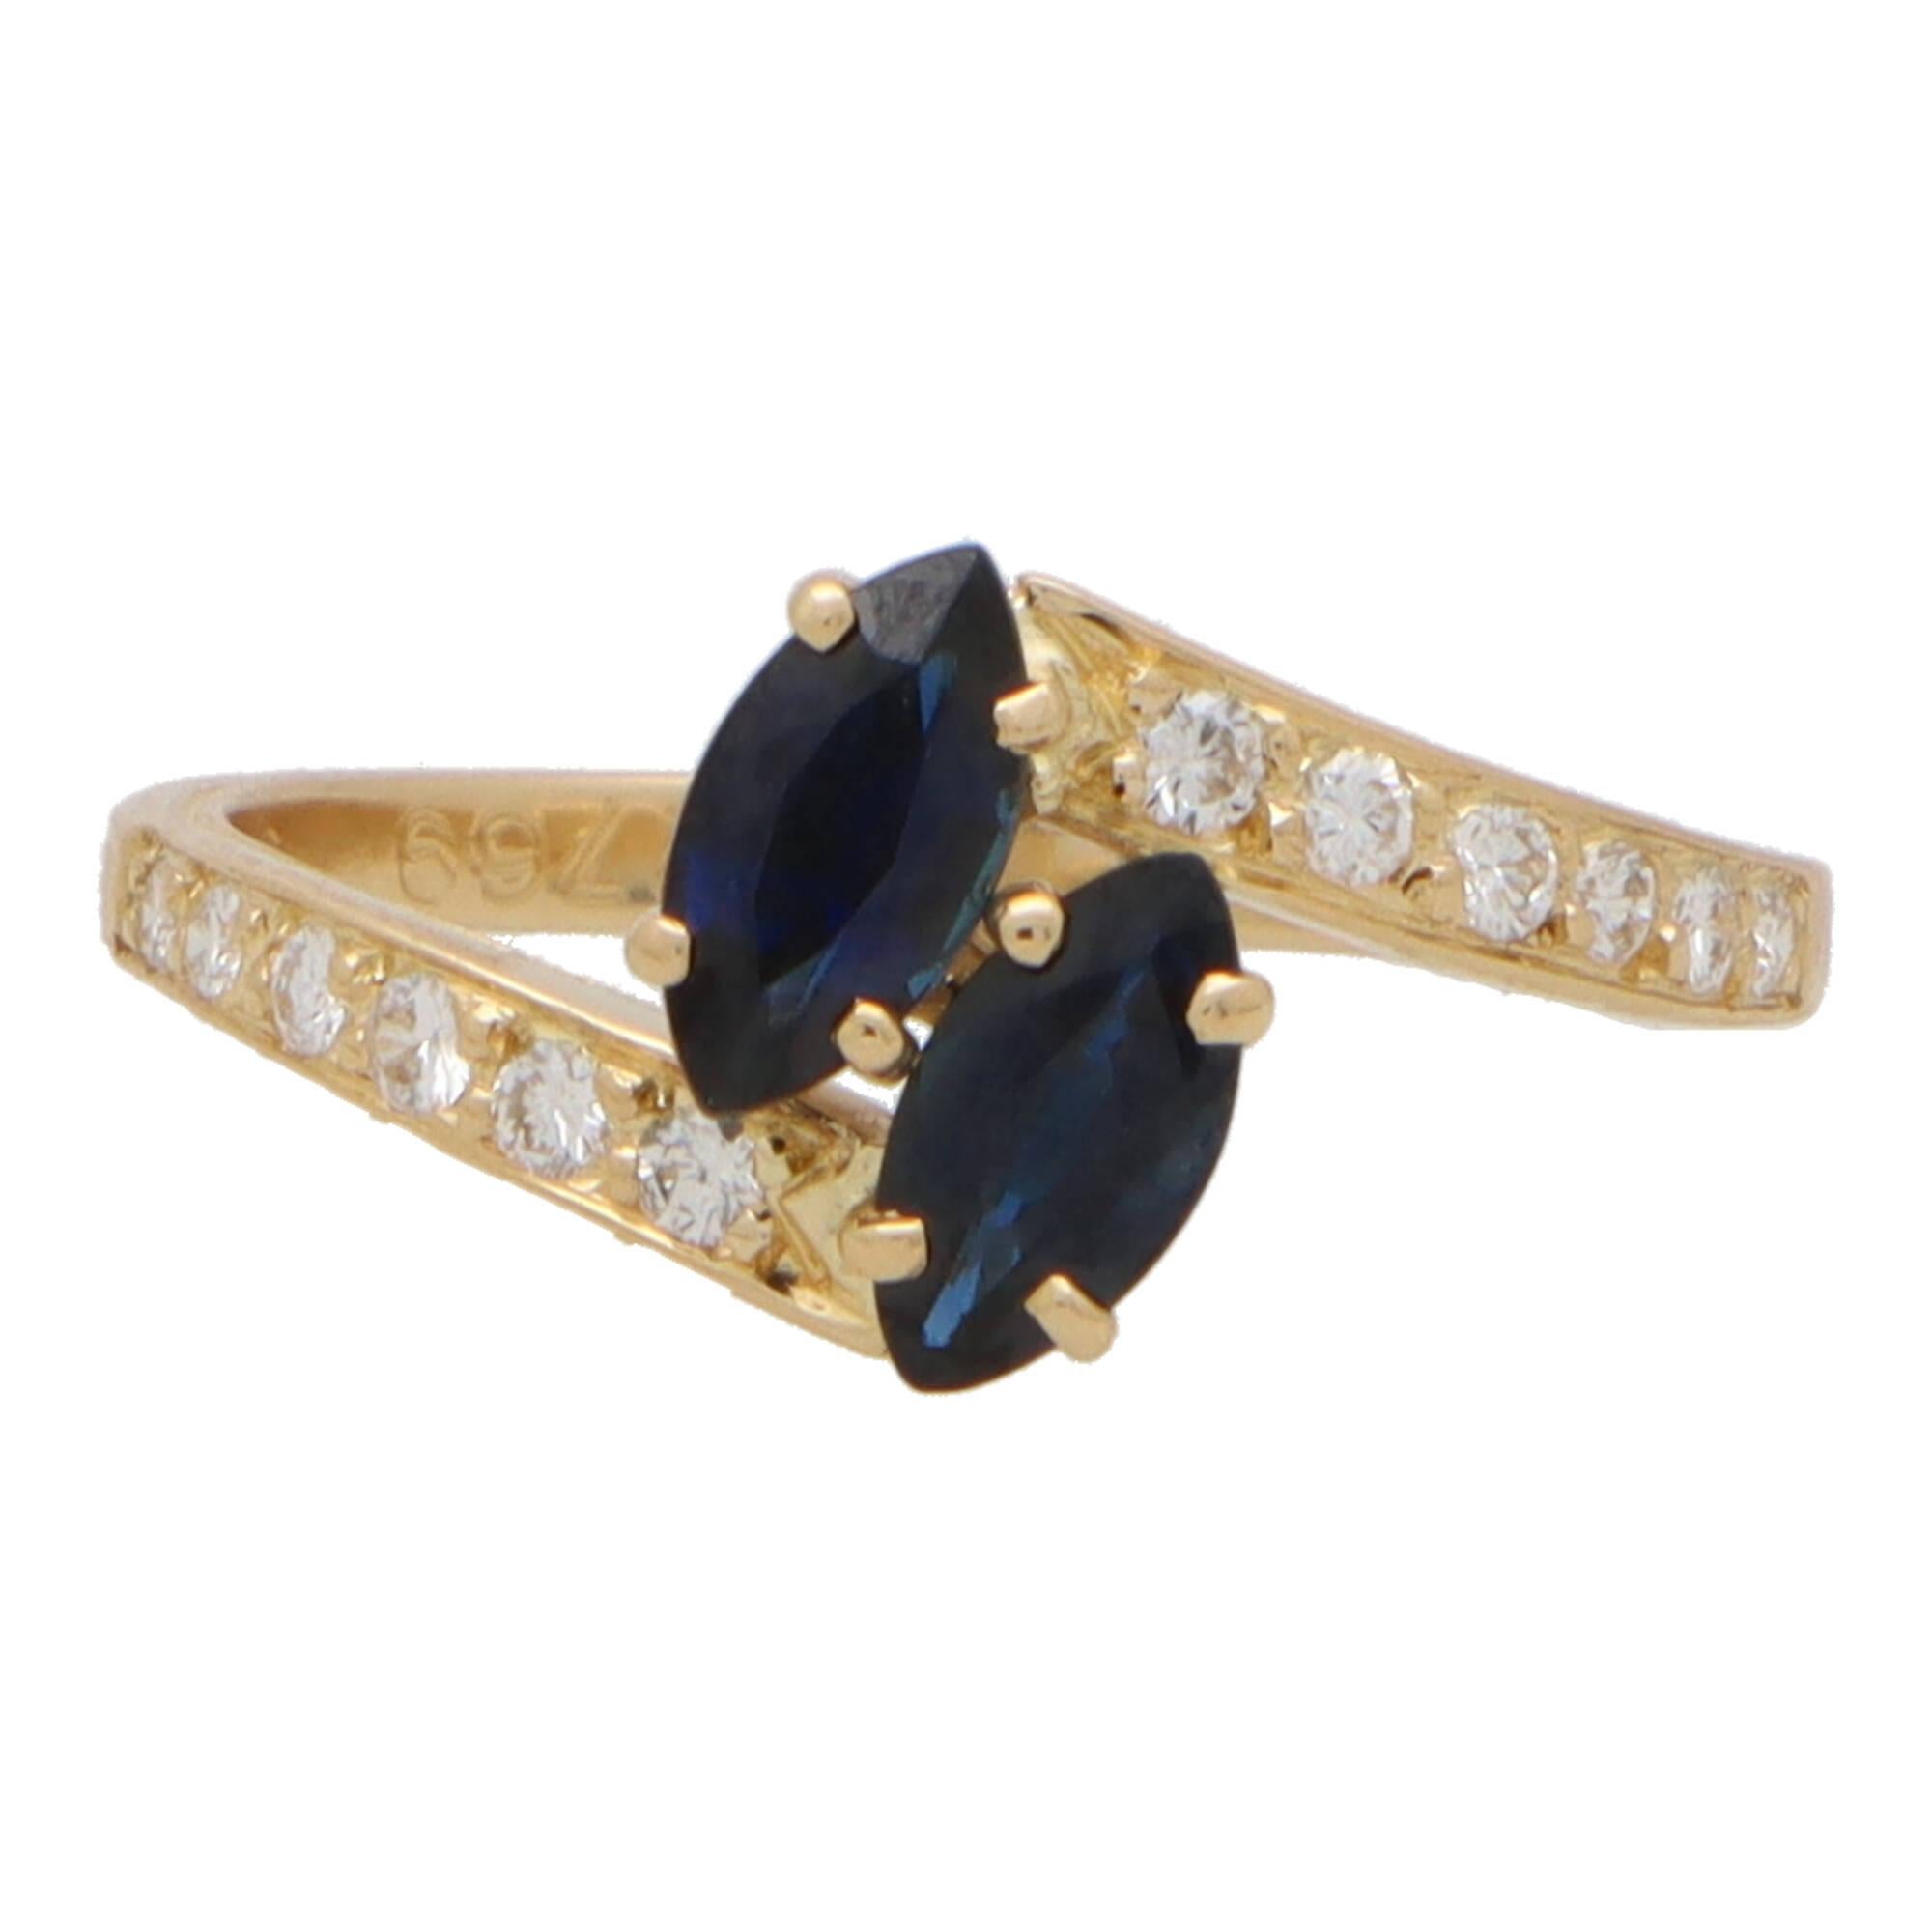 A beautiful vintage Cartier toi-et-moi sapphire and diamond crossover ring set in 18k yellow gold.

The phrase ‘toi-et-moi’ simply means ‘me and you’ and is famously known for being one of the most romantic ring designs in the jewellery industry. A